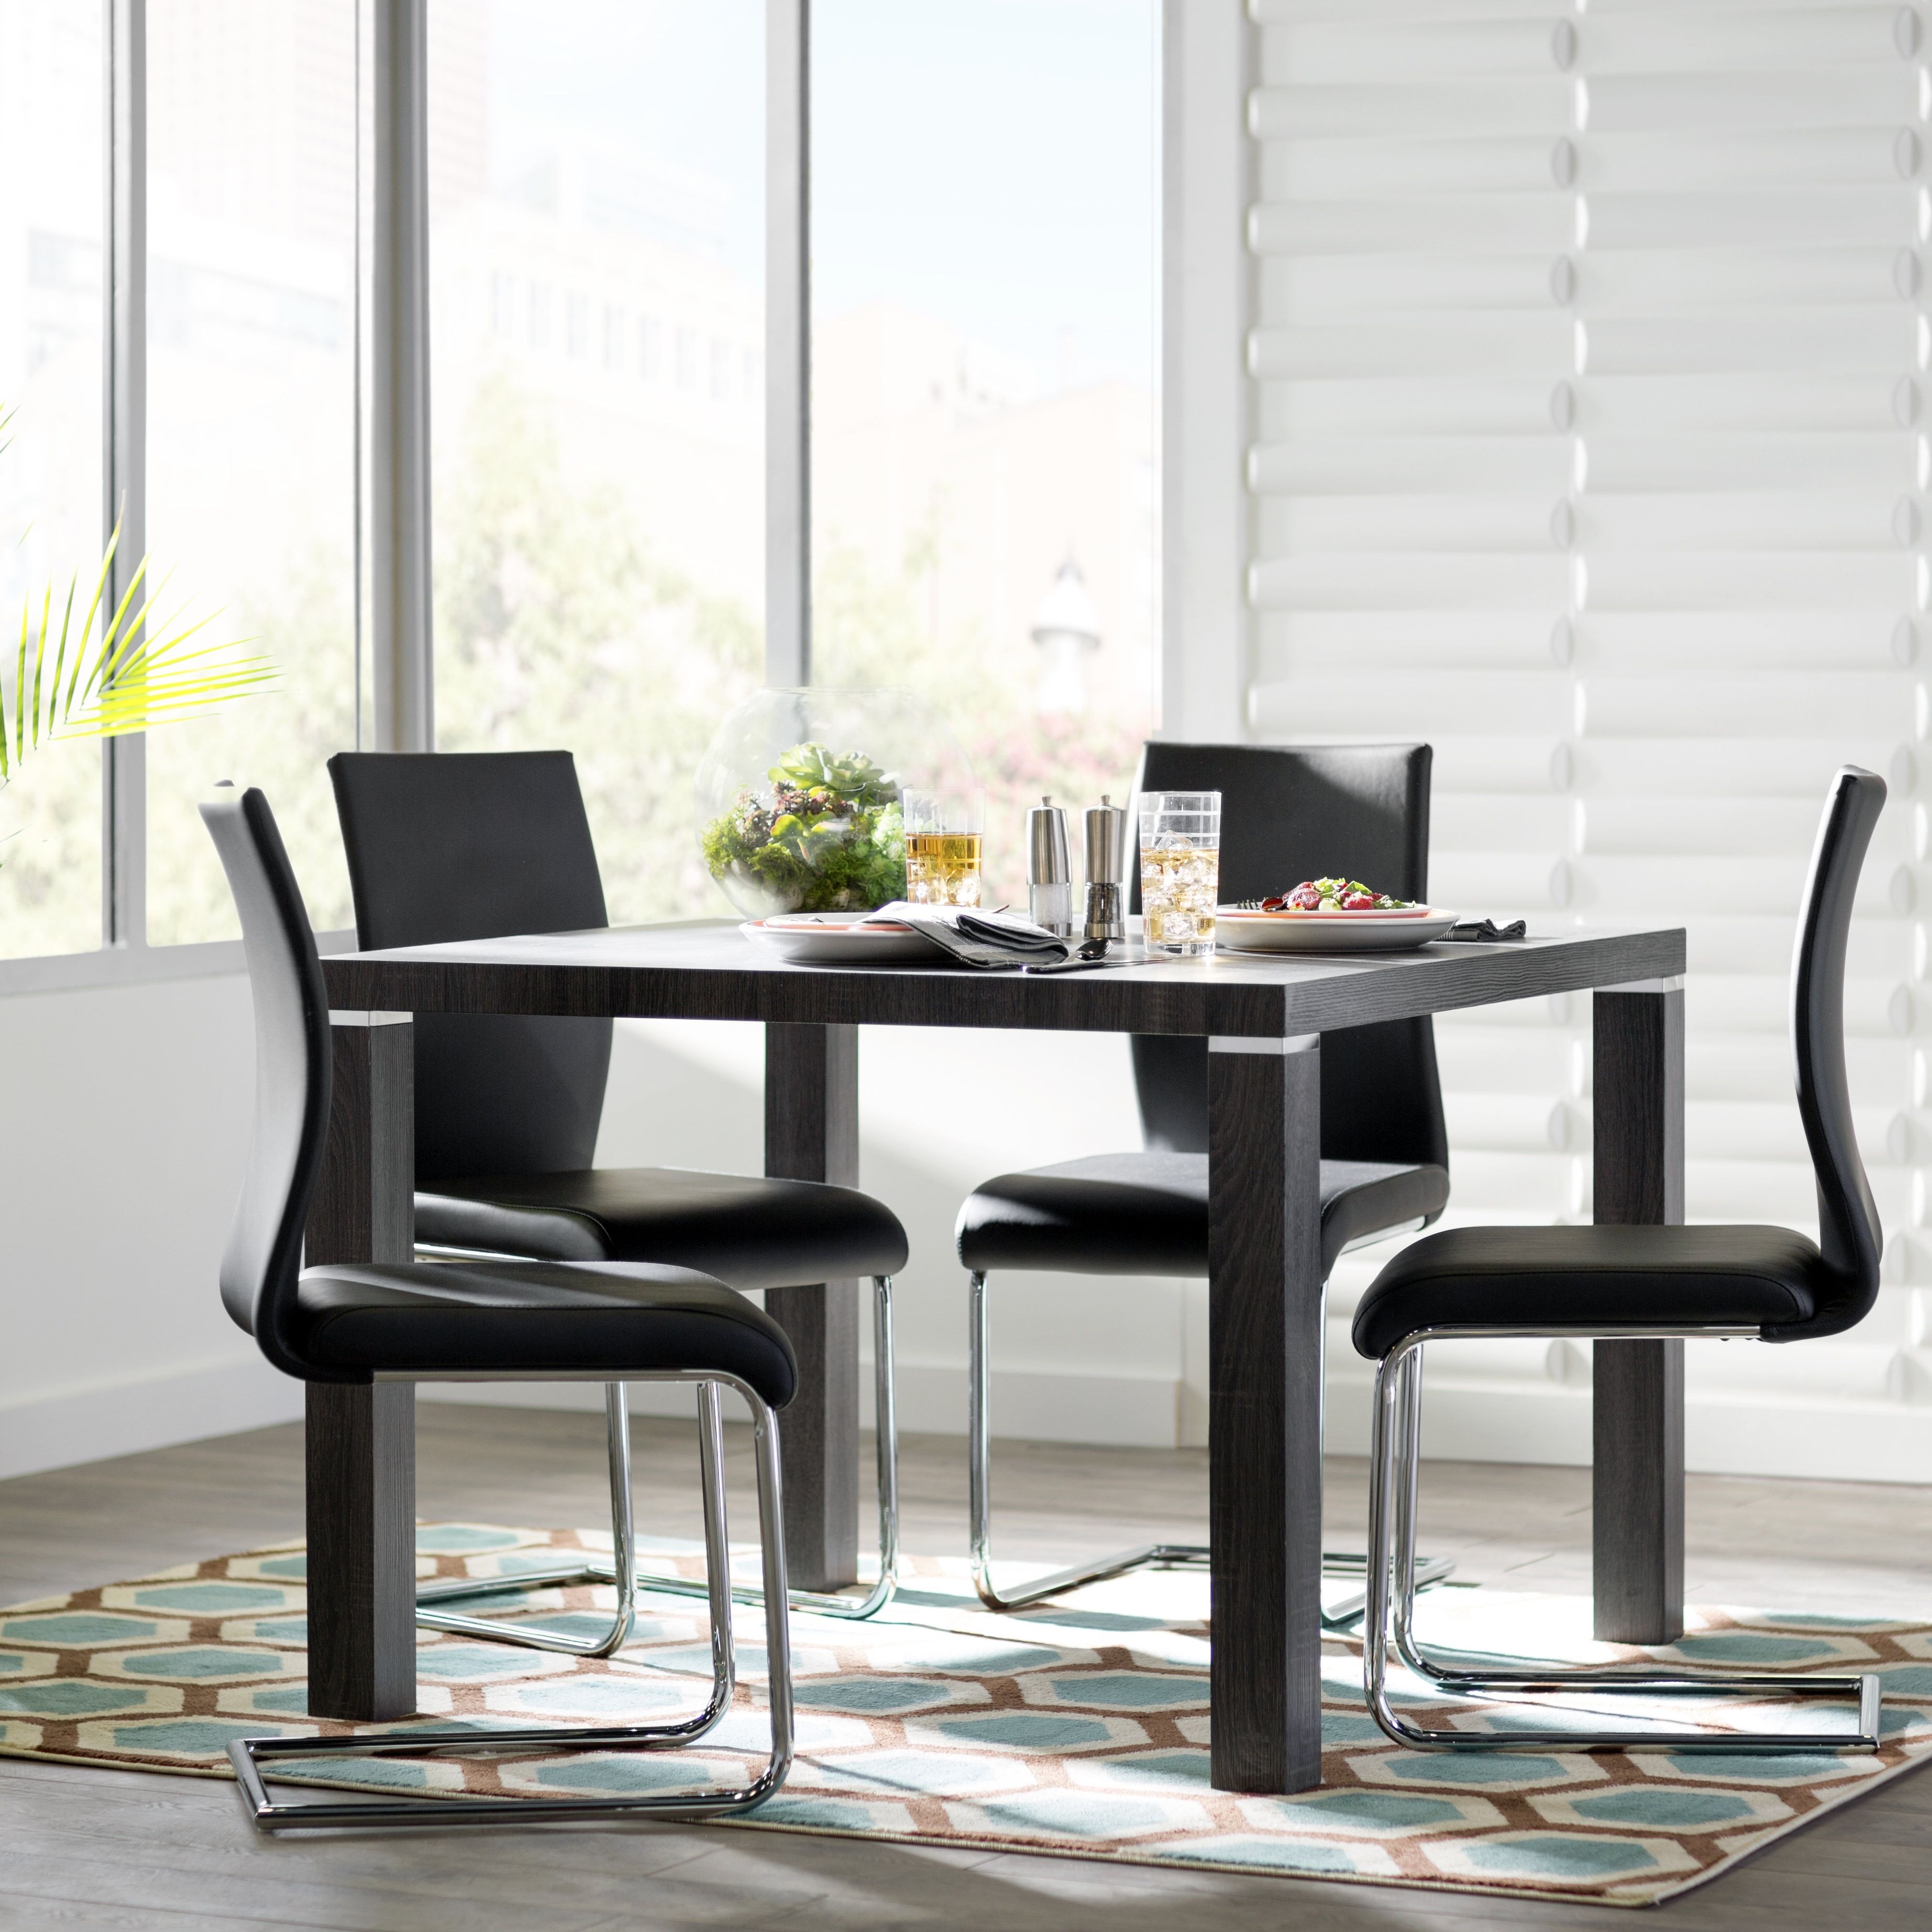 Wayfair For Norwood 6 Piece Rectangular Extension Dining Sets With Upholstered Side Chairs (View 5 of 25)